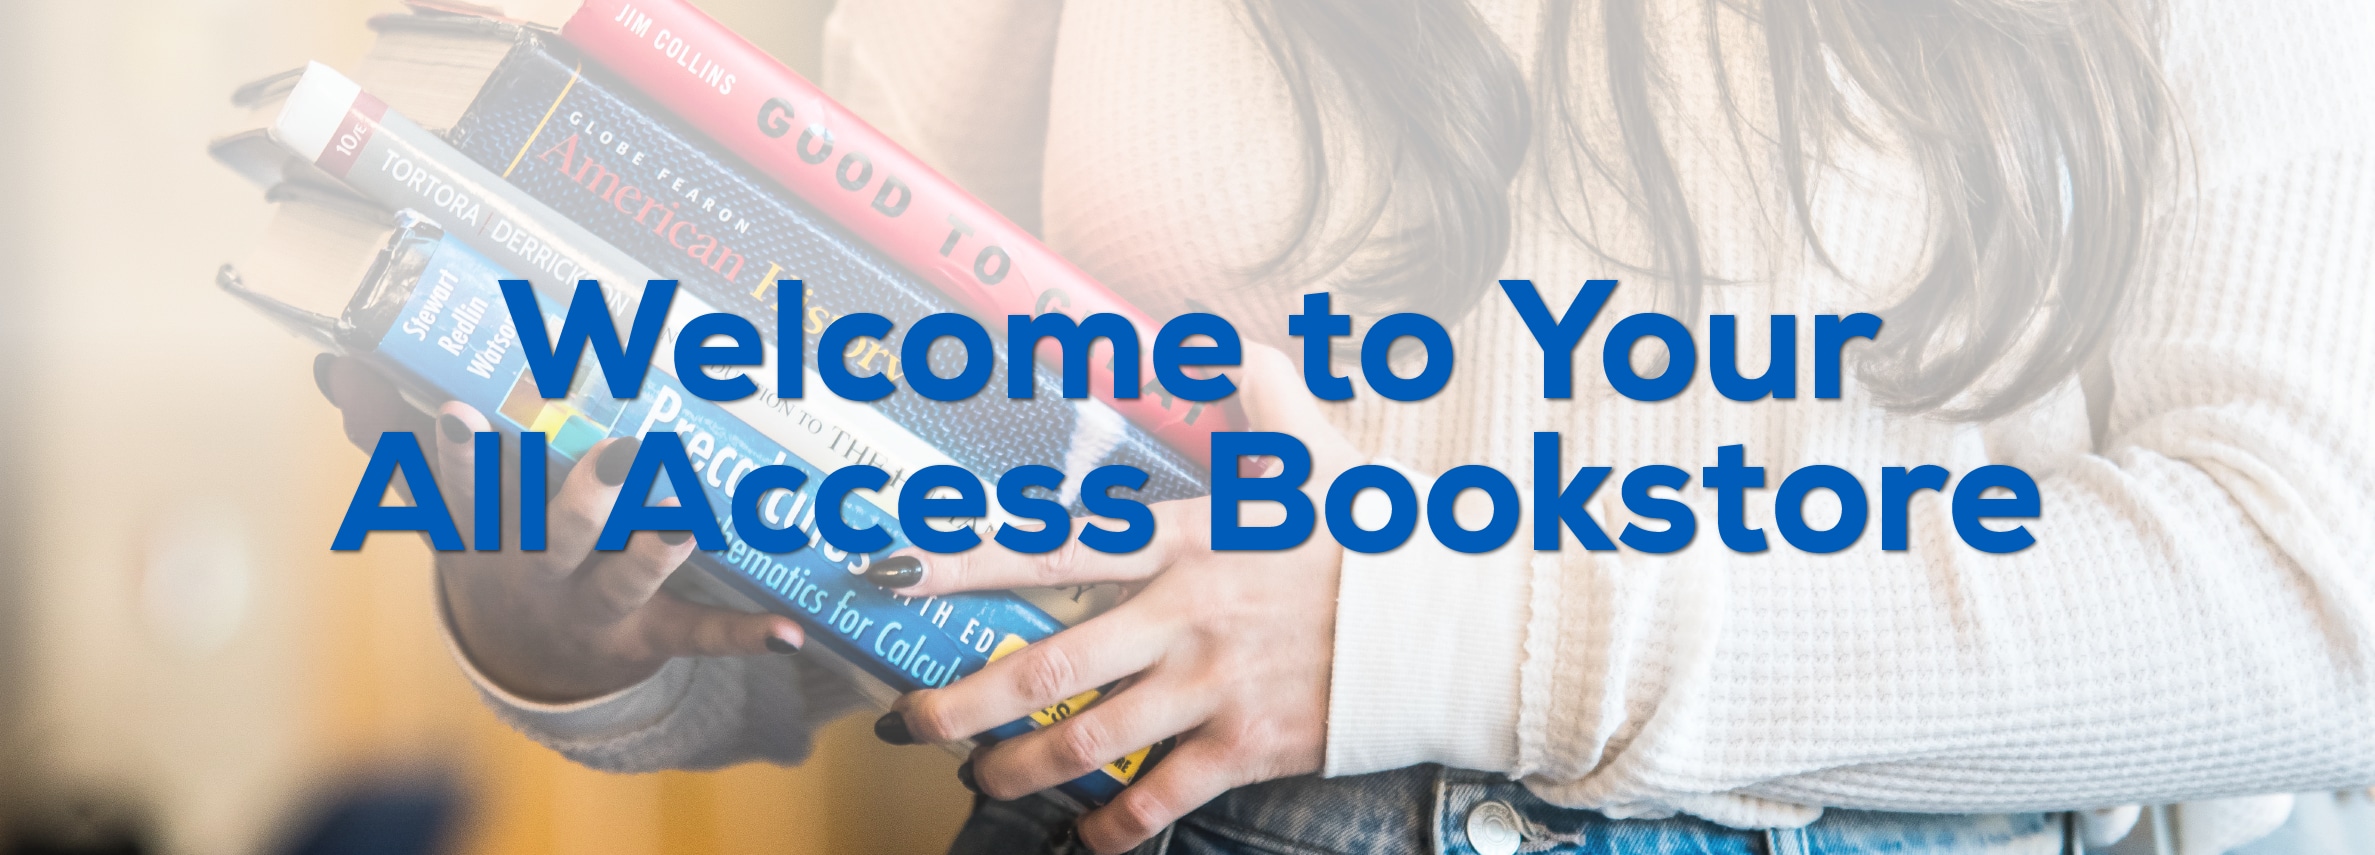 Welcome to Your All Access Bookstore